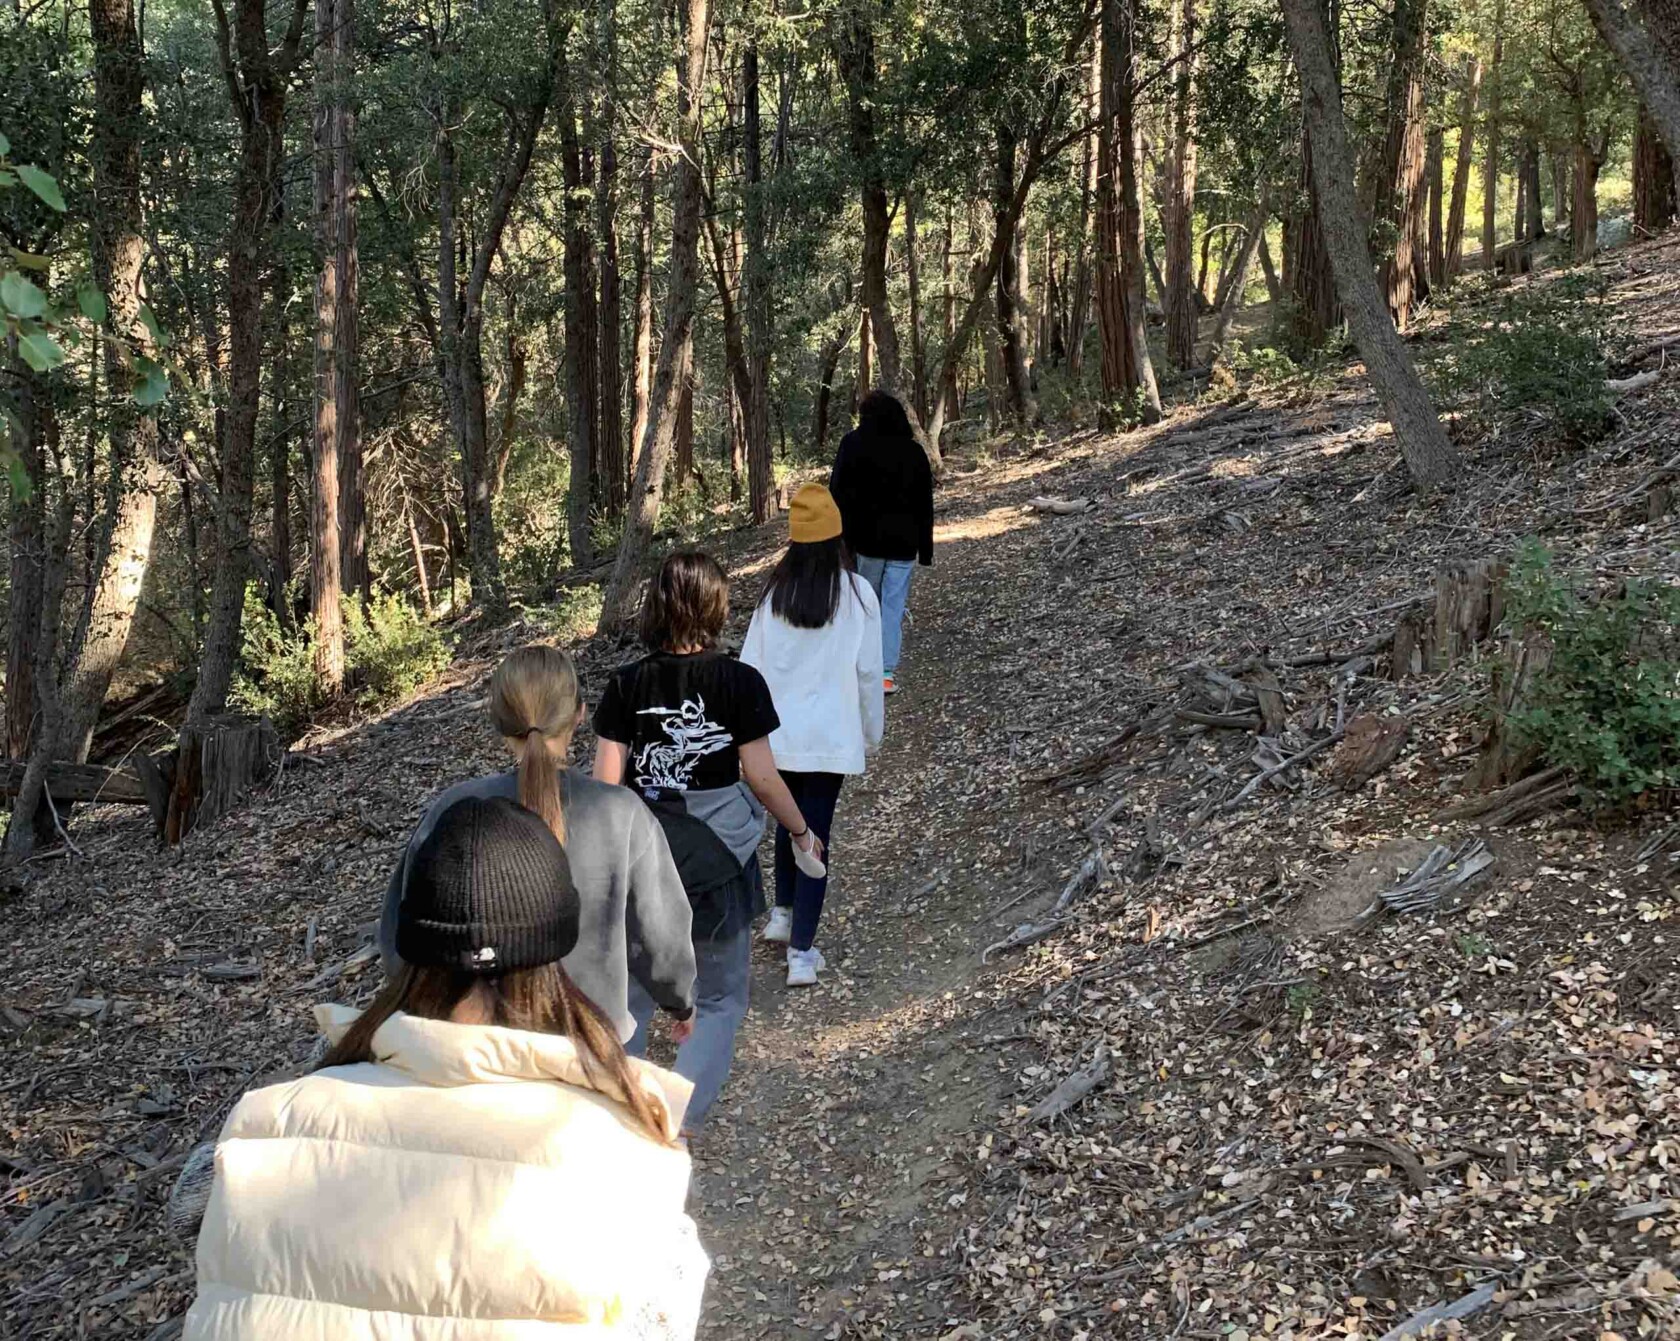 Students on a hike.